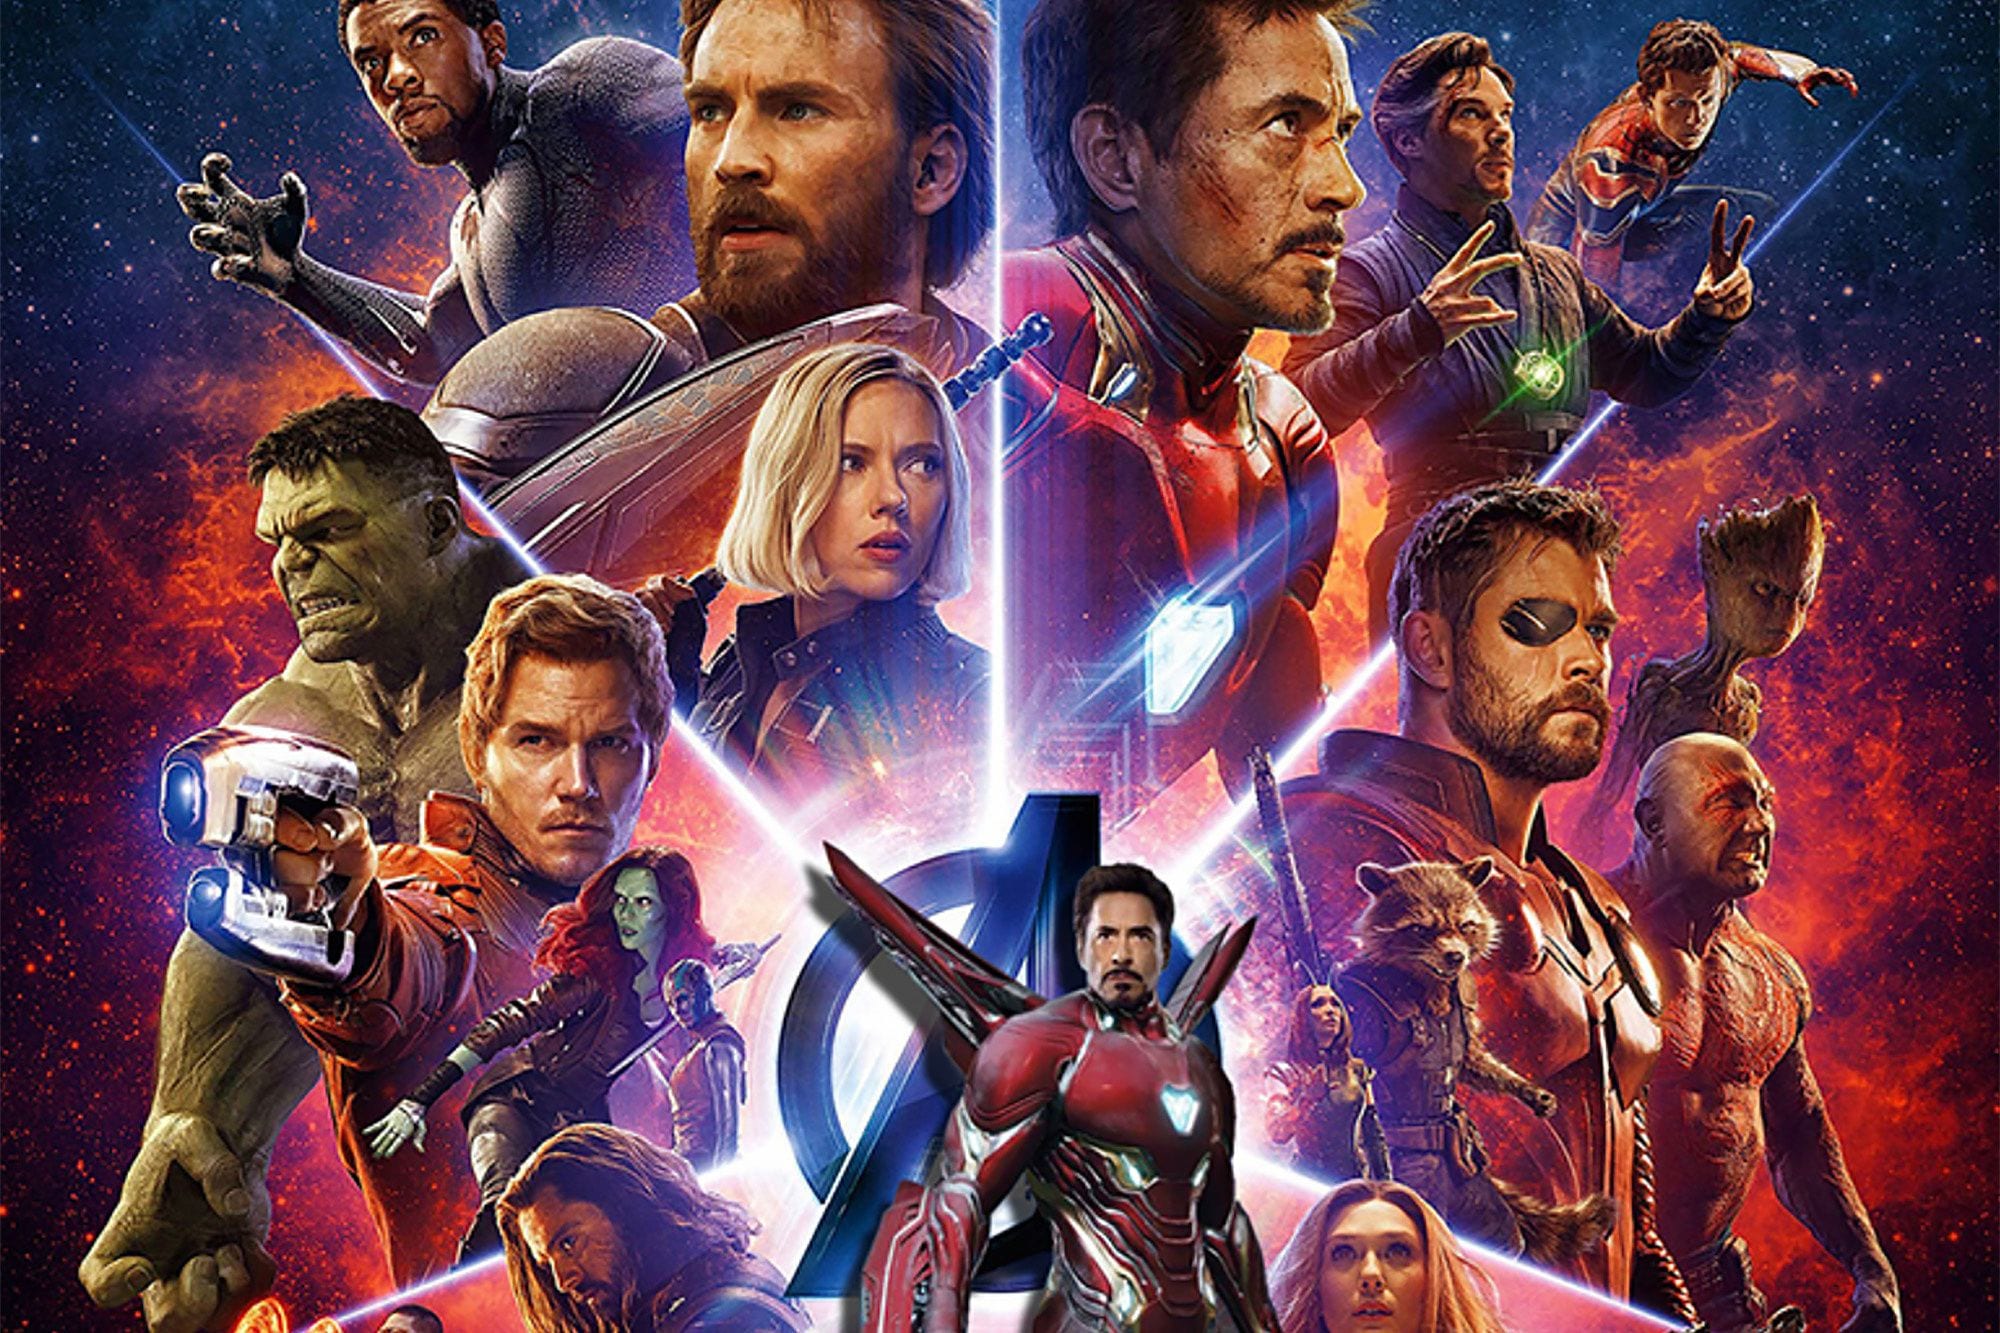 Avengers Endgame: 'Avengers 4 is the END of these SIX heroes' and